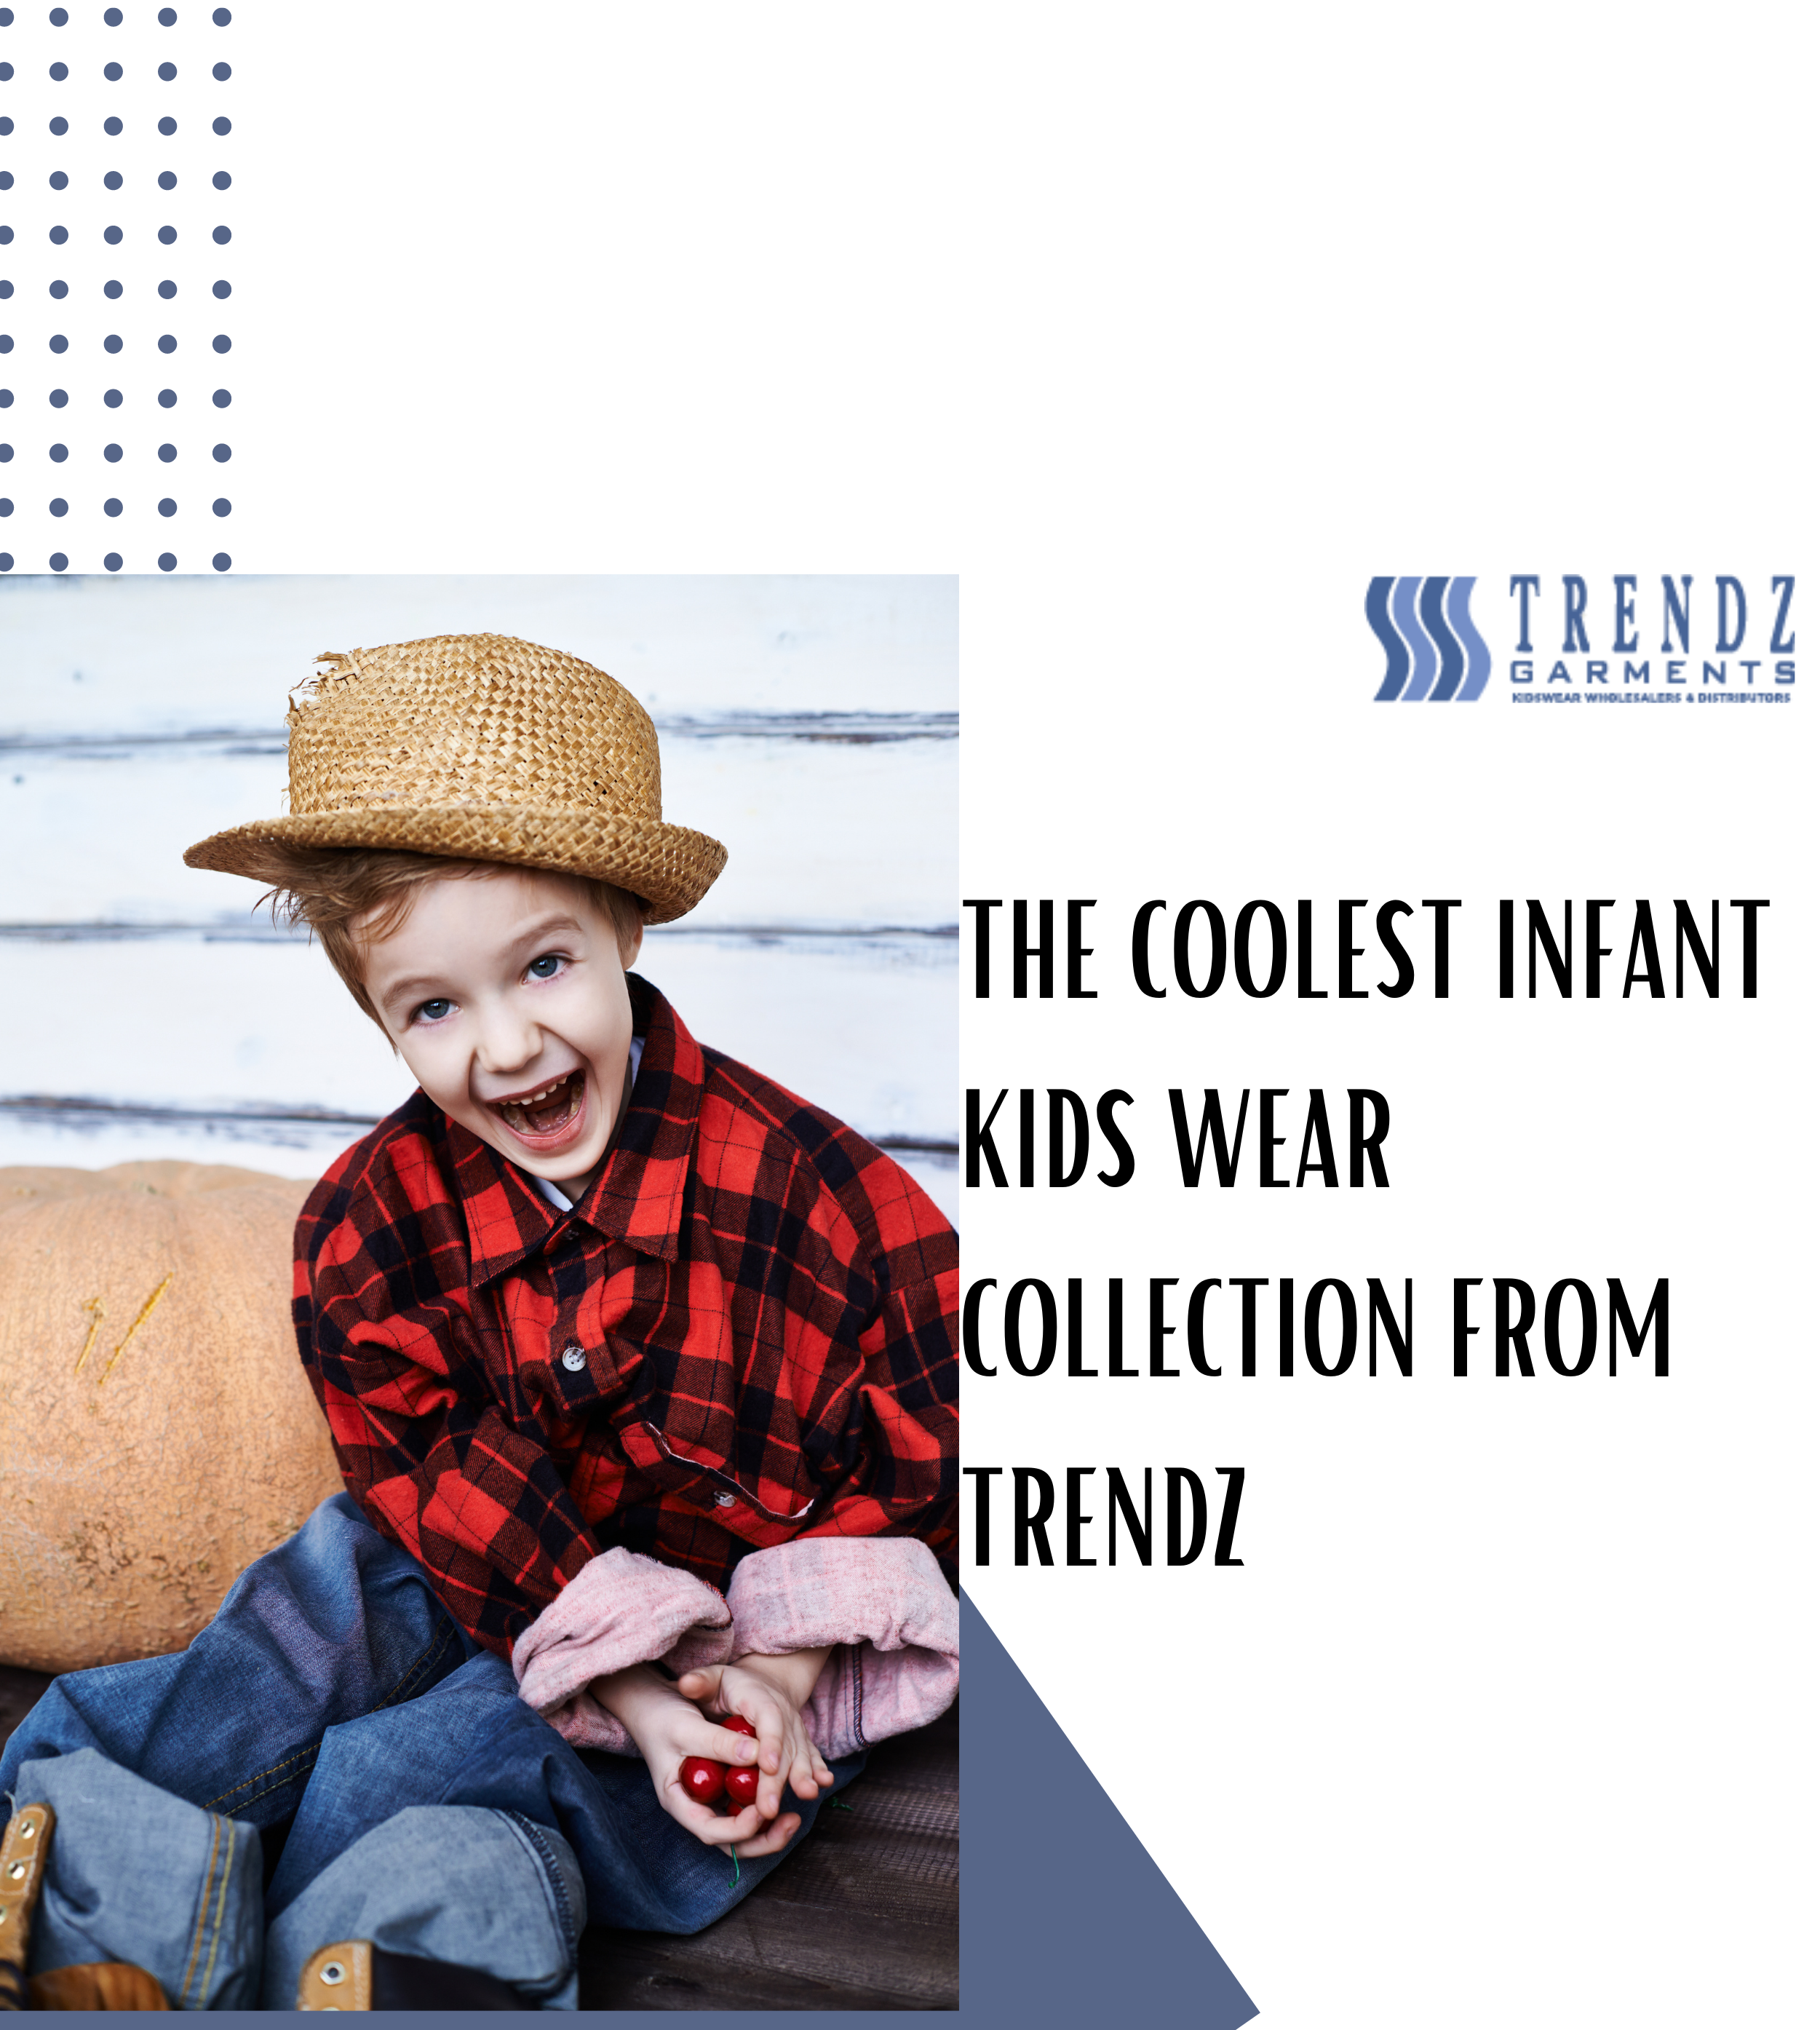 kids wear collections from trendz